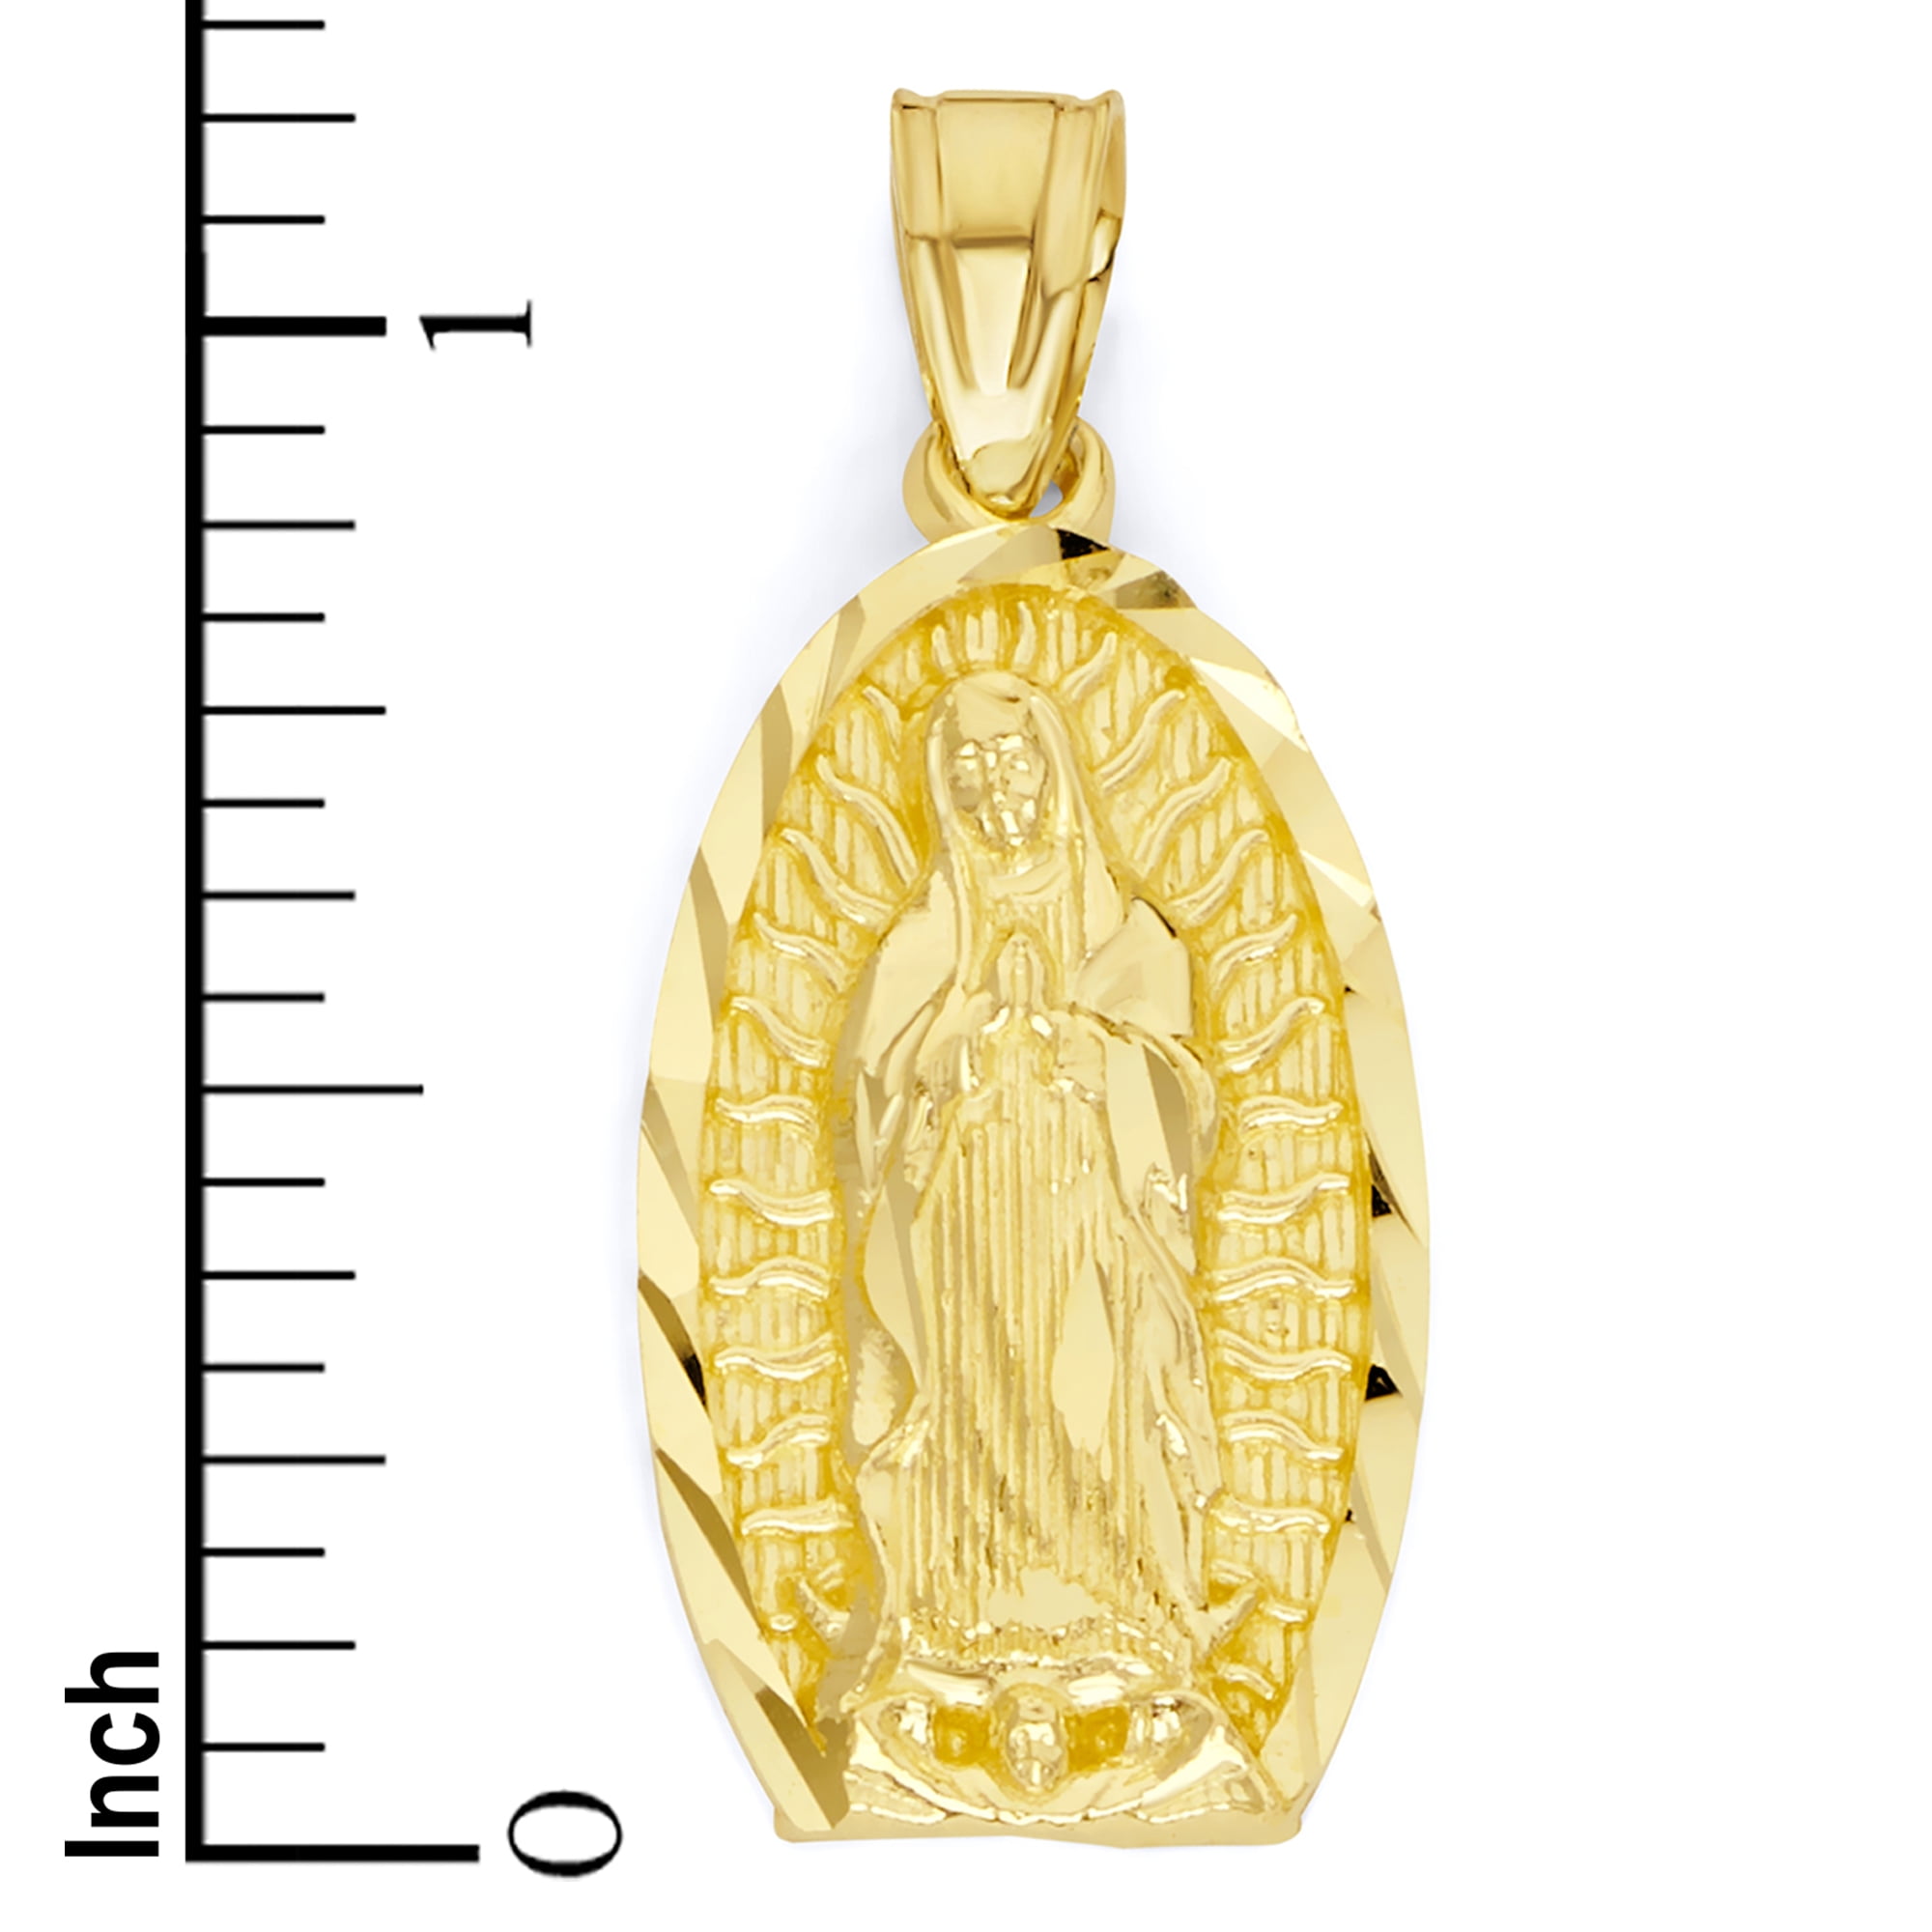 Solid 10K Rose Gold Miraculous Medal Virgin Mary Pendant, 9/16